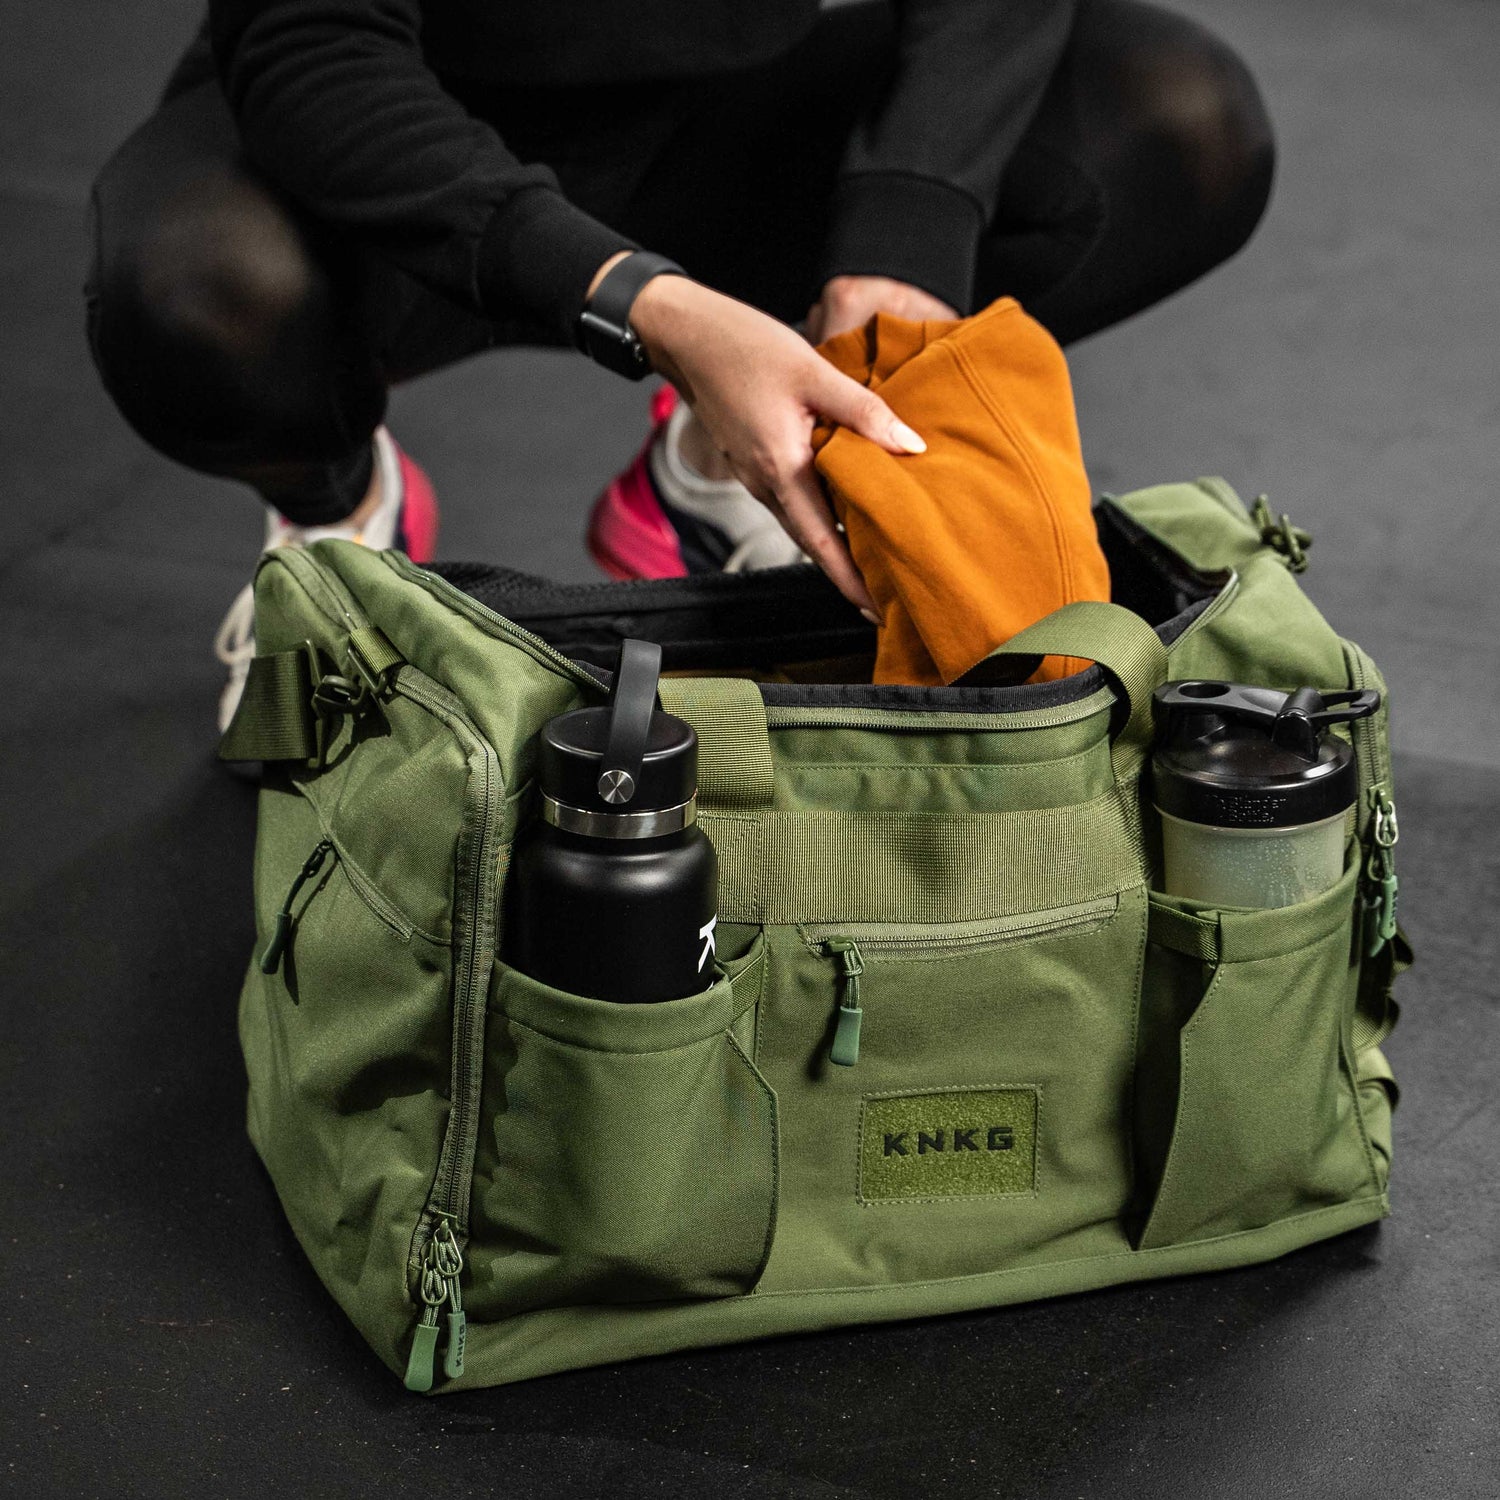 Care Guide: Recovery day with your KNKG bag